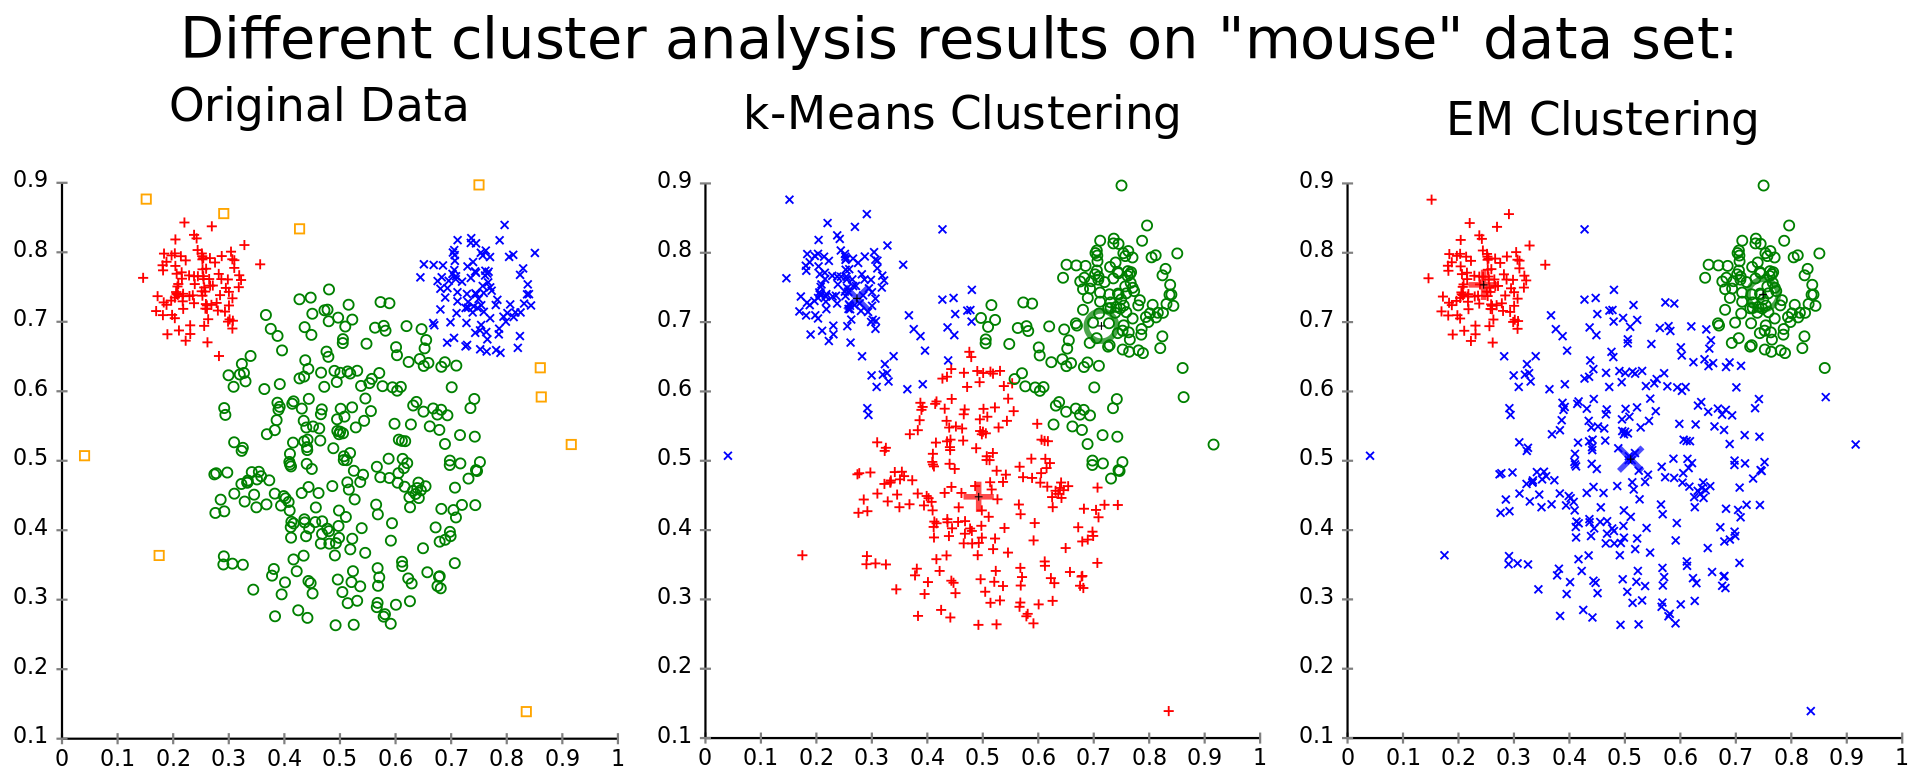 Comparison of $k$-means and EM on artificial data called [Mouse](https://elki-project.github.io/datasets/) dataset. Using the Variances, the EM algorithm can describe the normal distributions exact, while $k$-means splits the data in [Voronoi](https://bit.ly/1rVyJkt)-Cells.